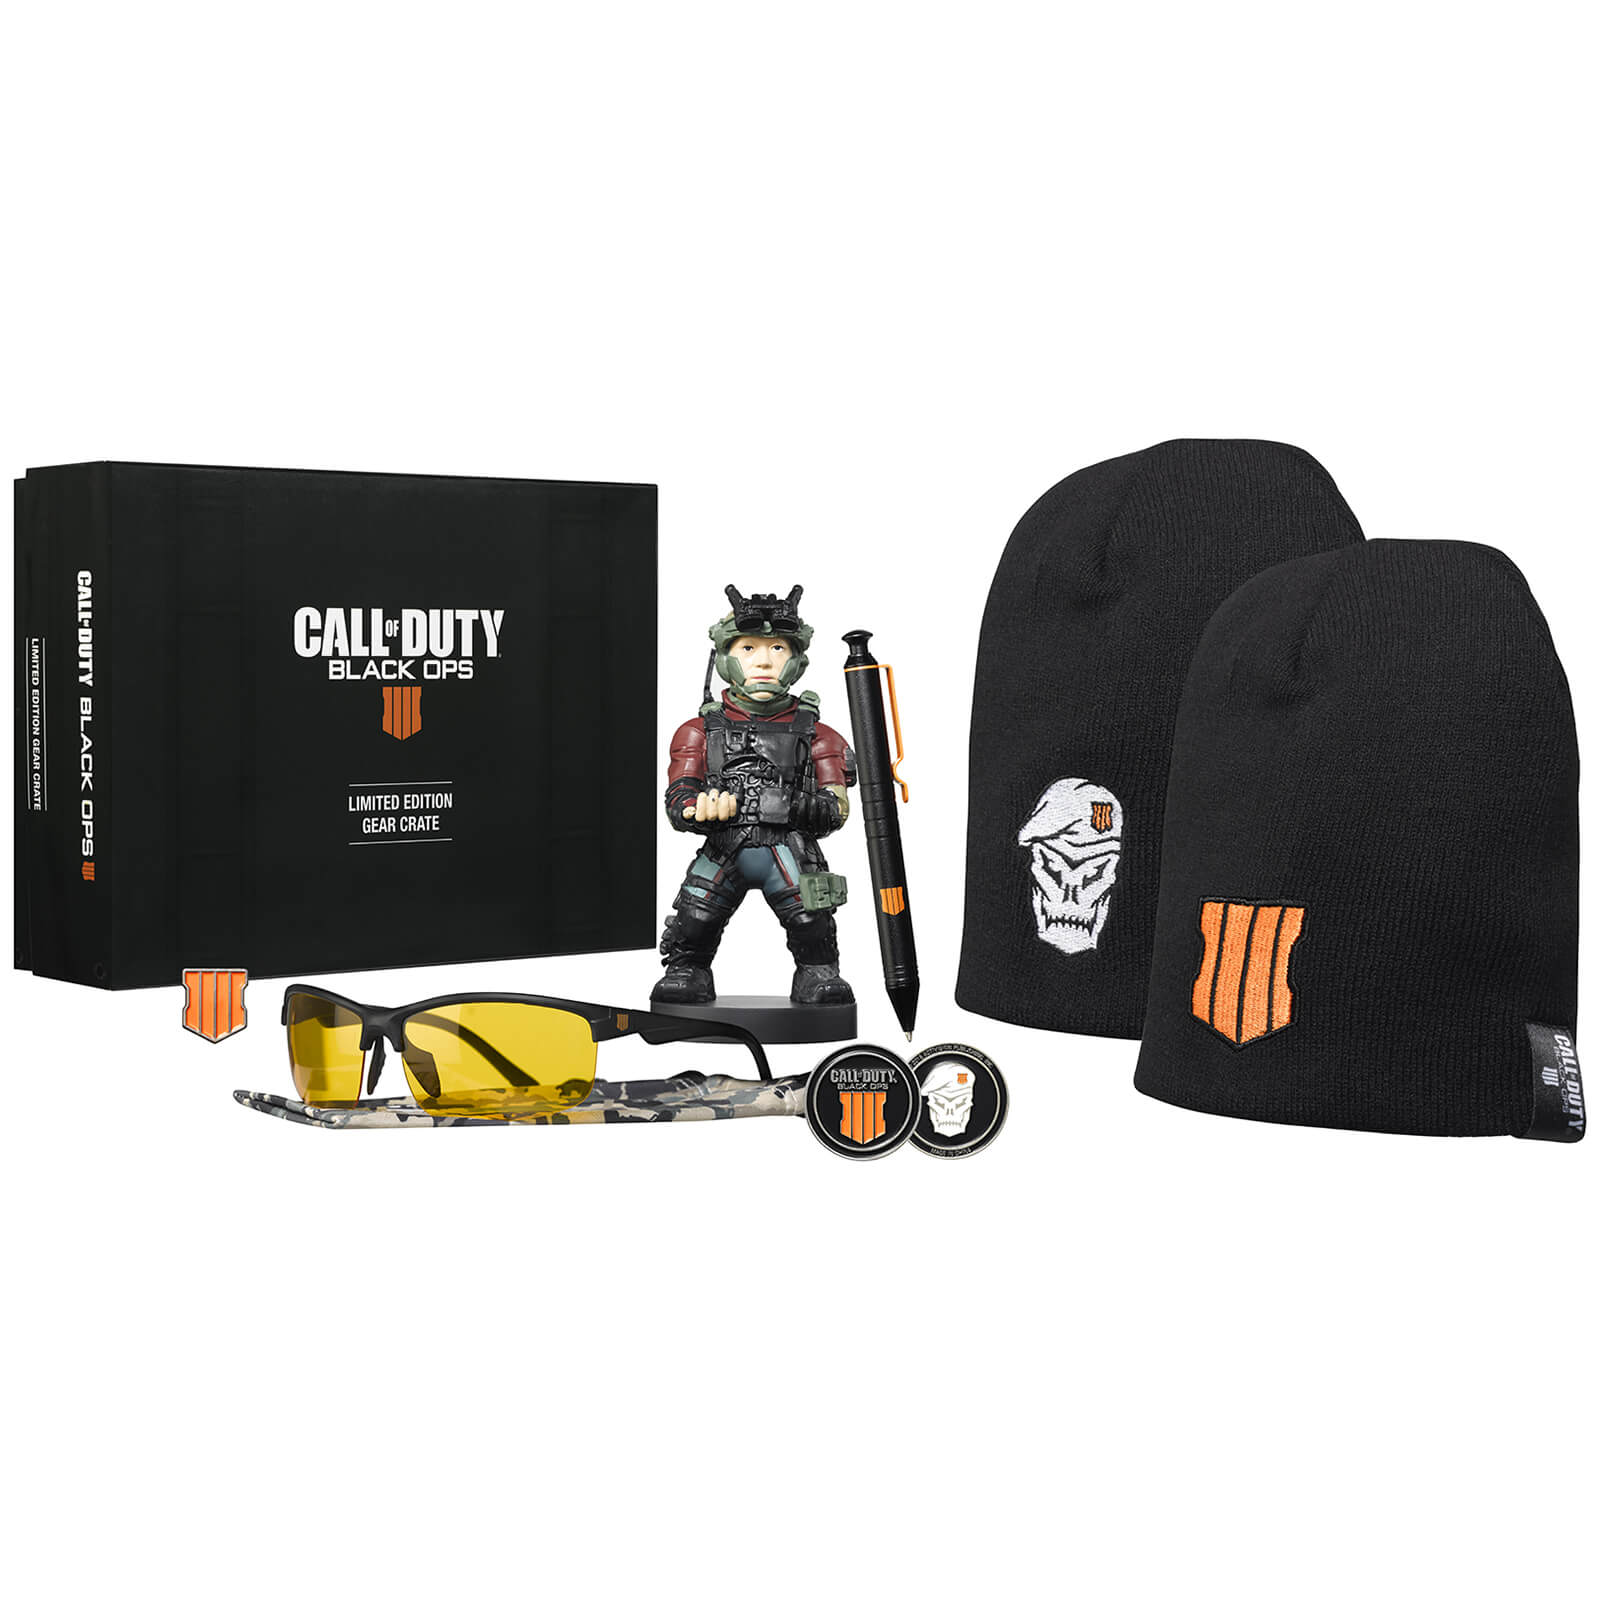 Call of Duty Black Ops 4 Limited Edition Gear Crate